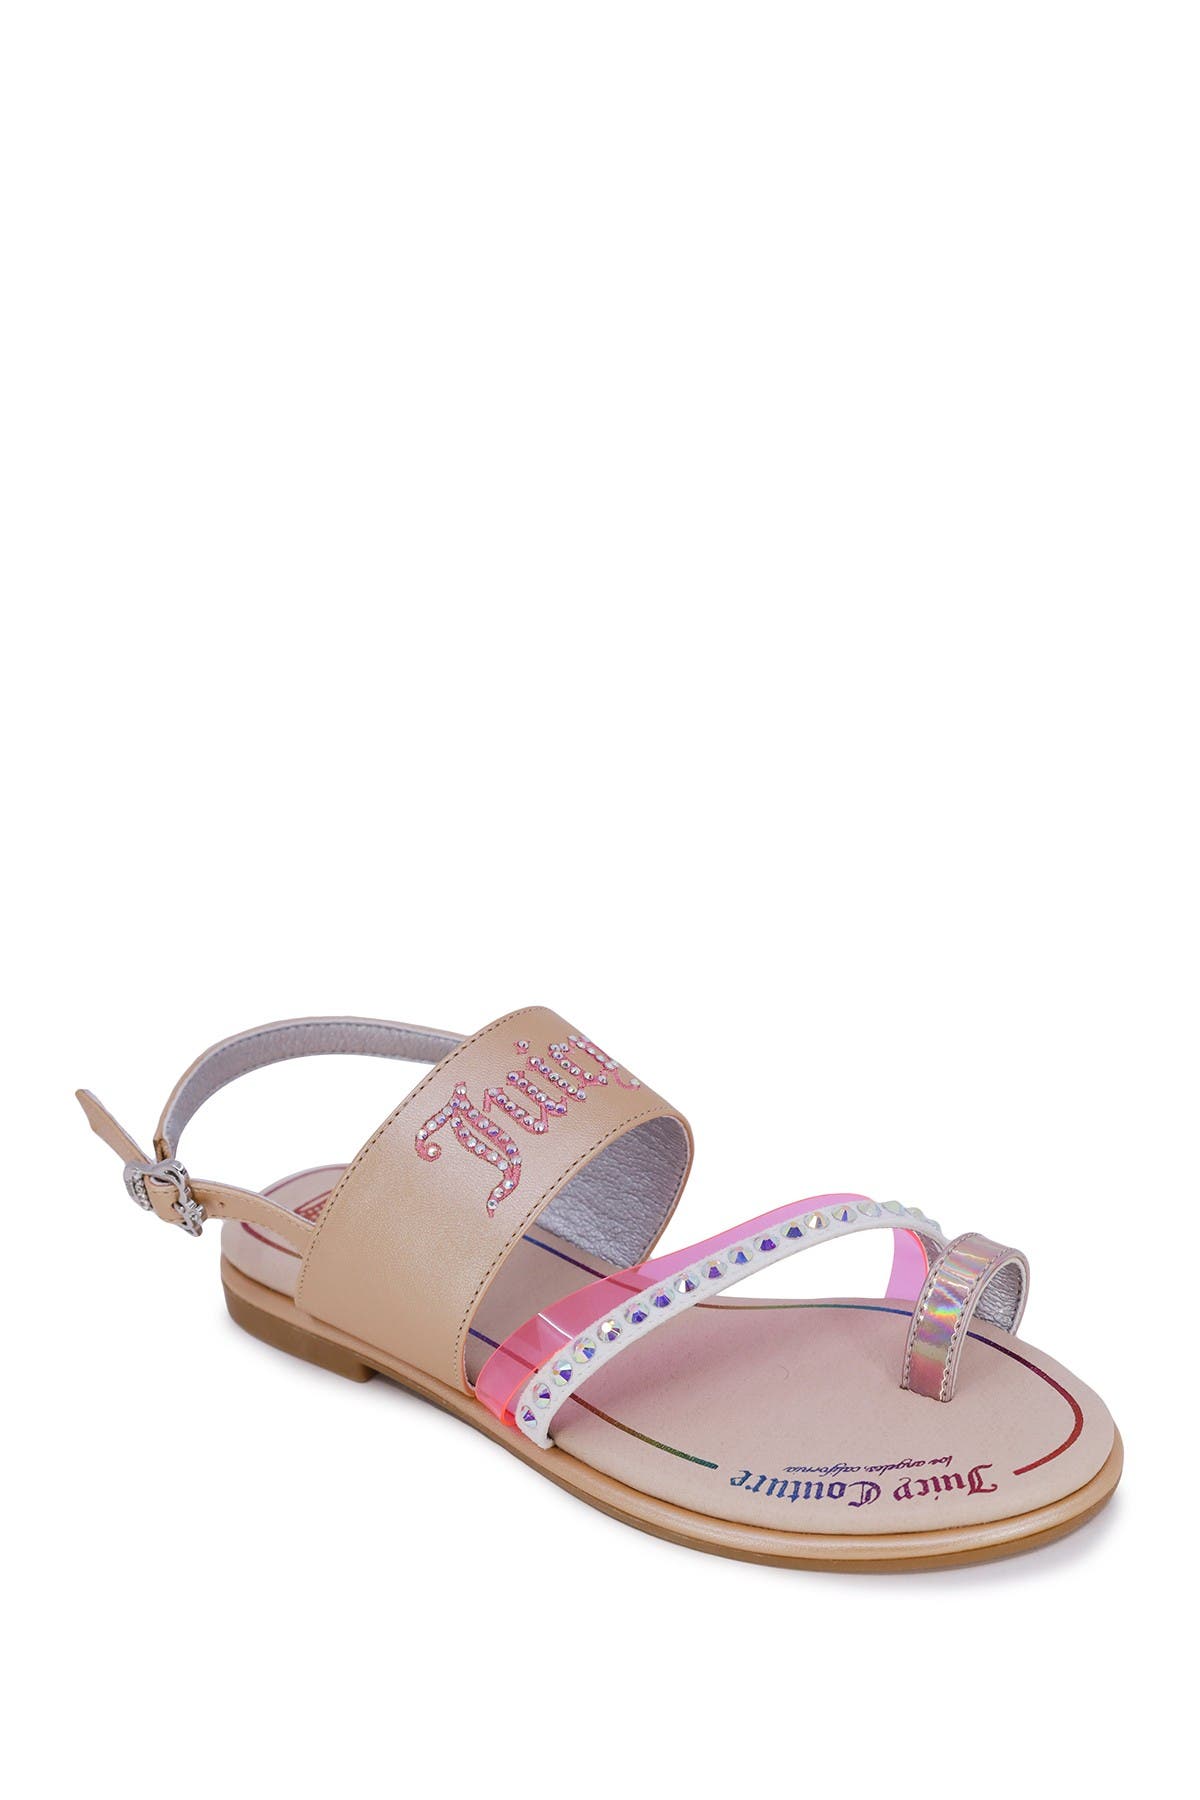 Juicy Couture Kids' Little Girls Jck Concord Sandal In Nude